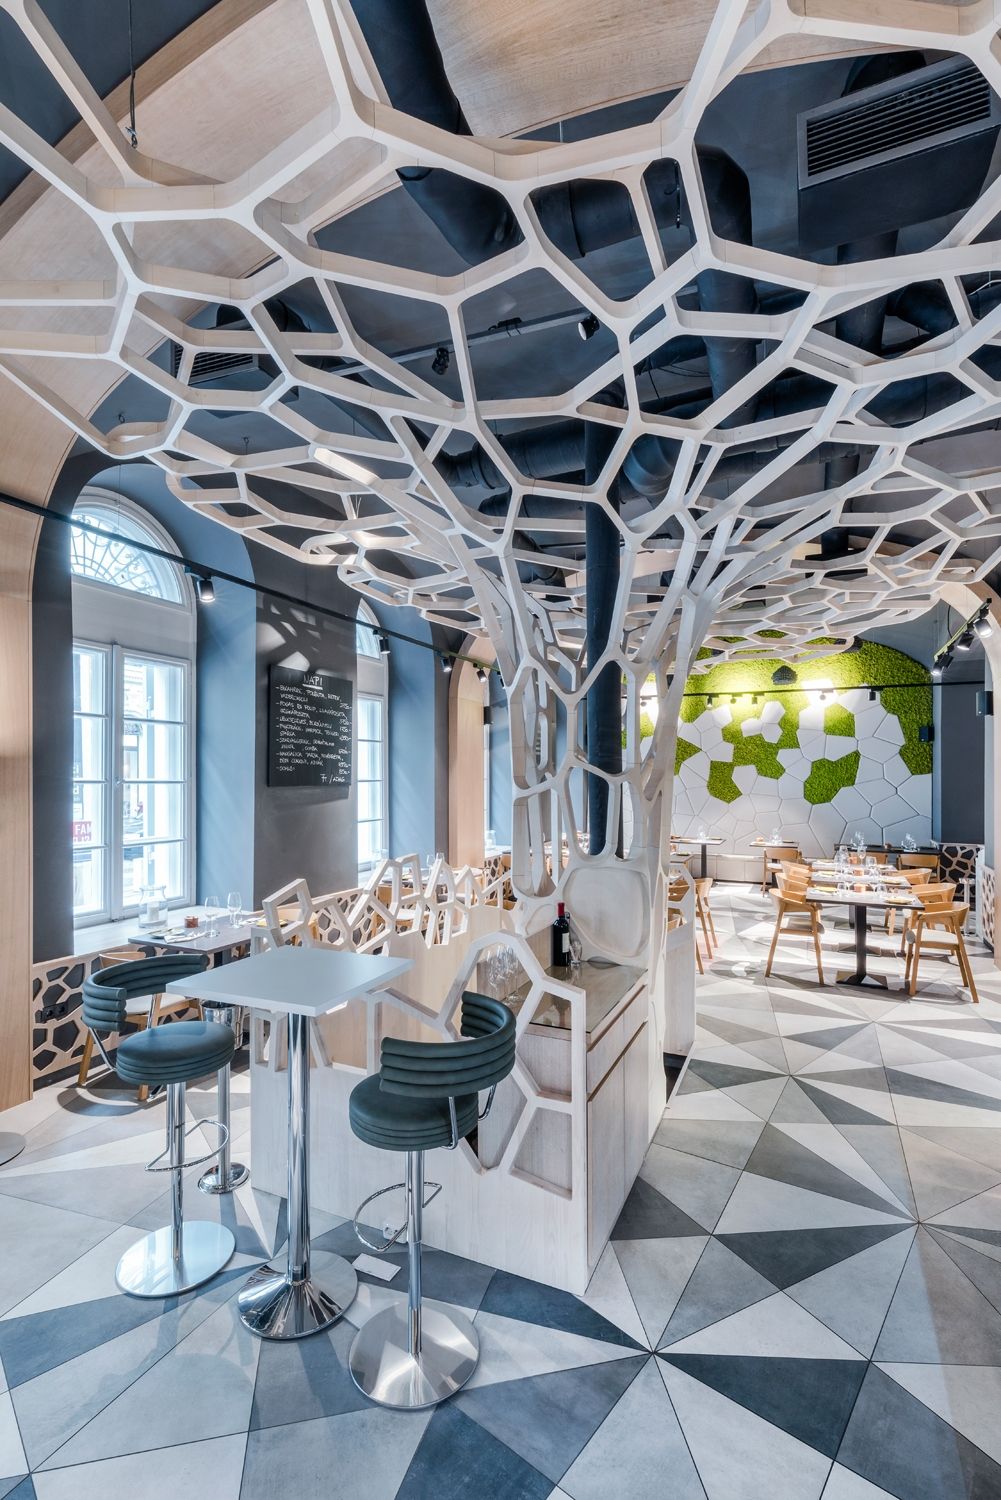 Mesh structure created in the centre of a restaurant